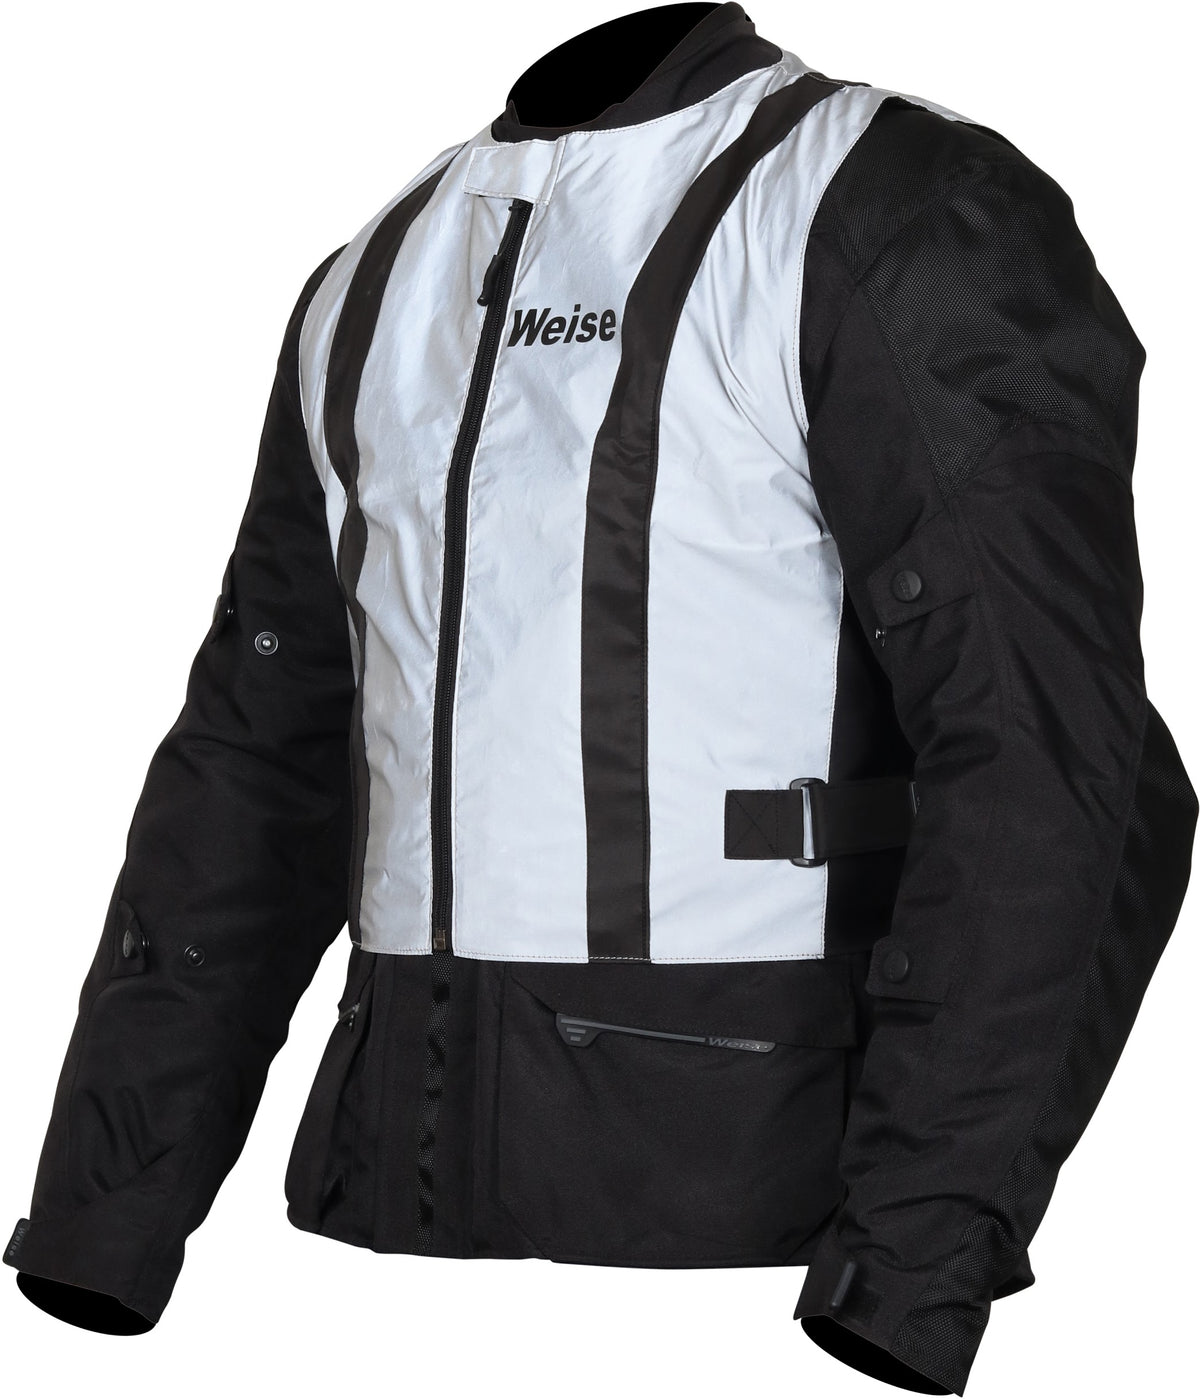 Vision Gilet - Averys Motorcycles